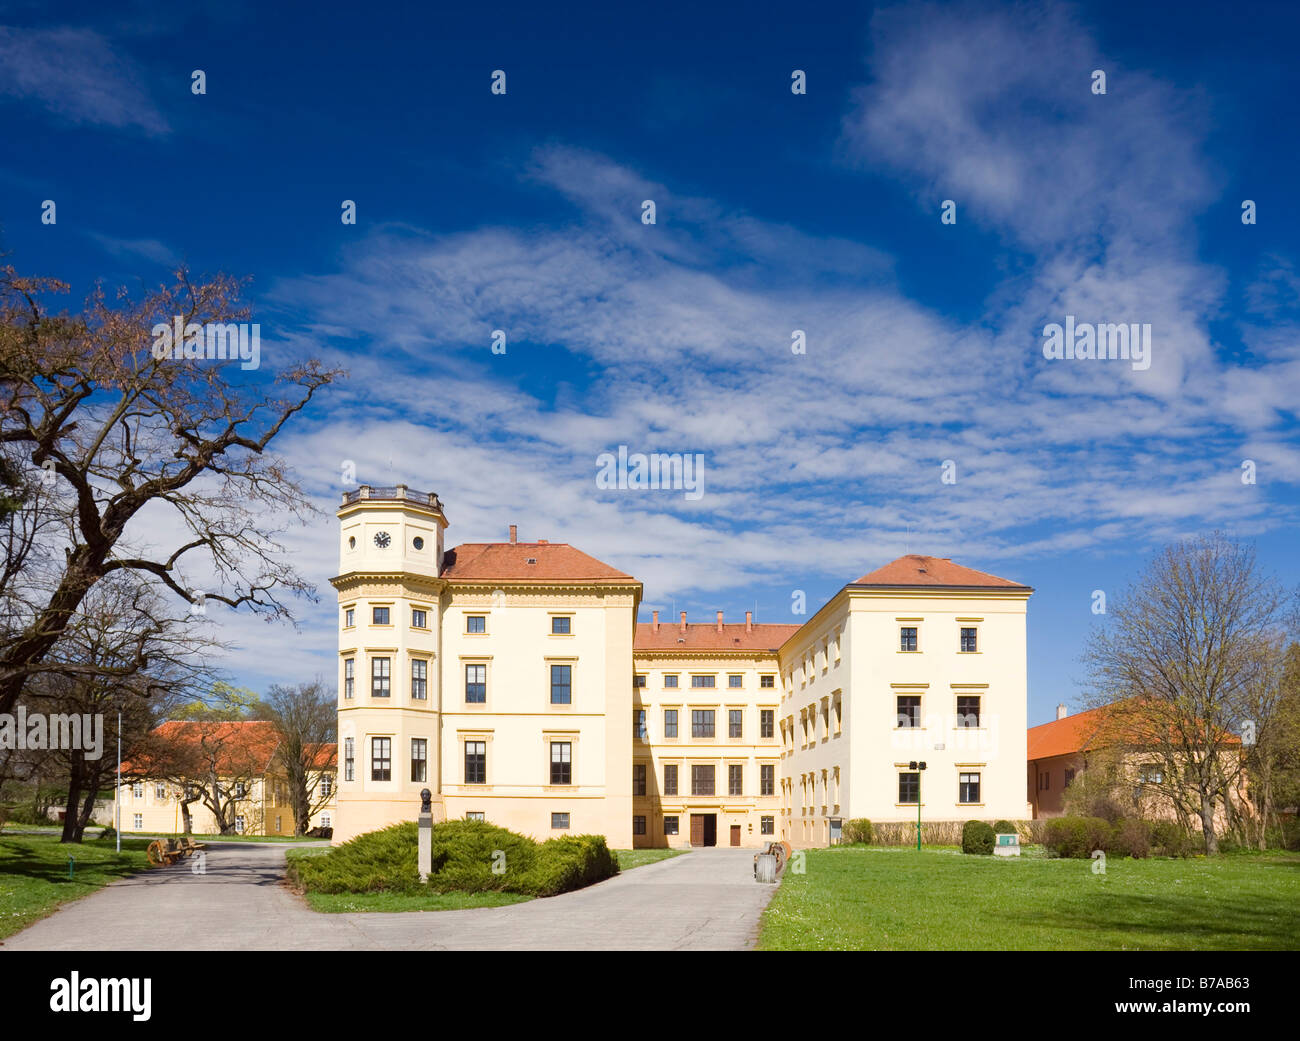 Chateau in Straznice, Hodonin district, South Moravia, Czech Republic, Europe Stock Photo